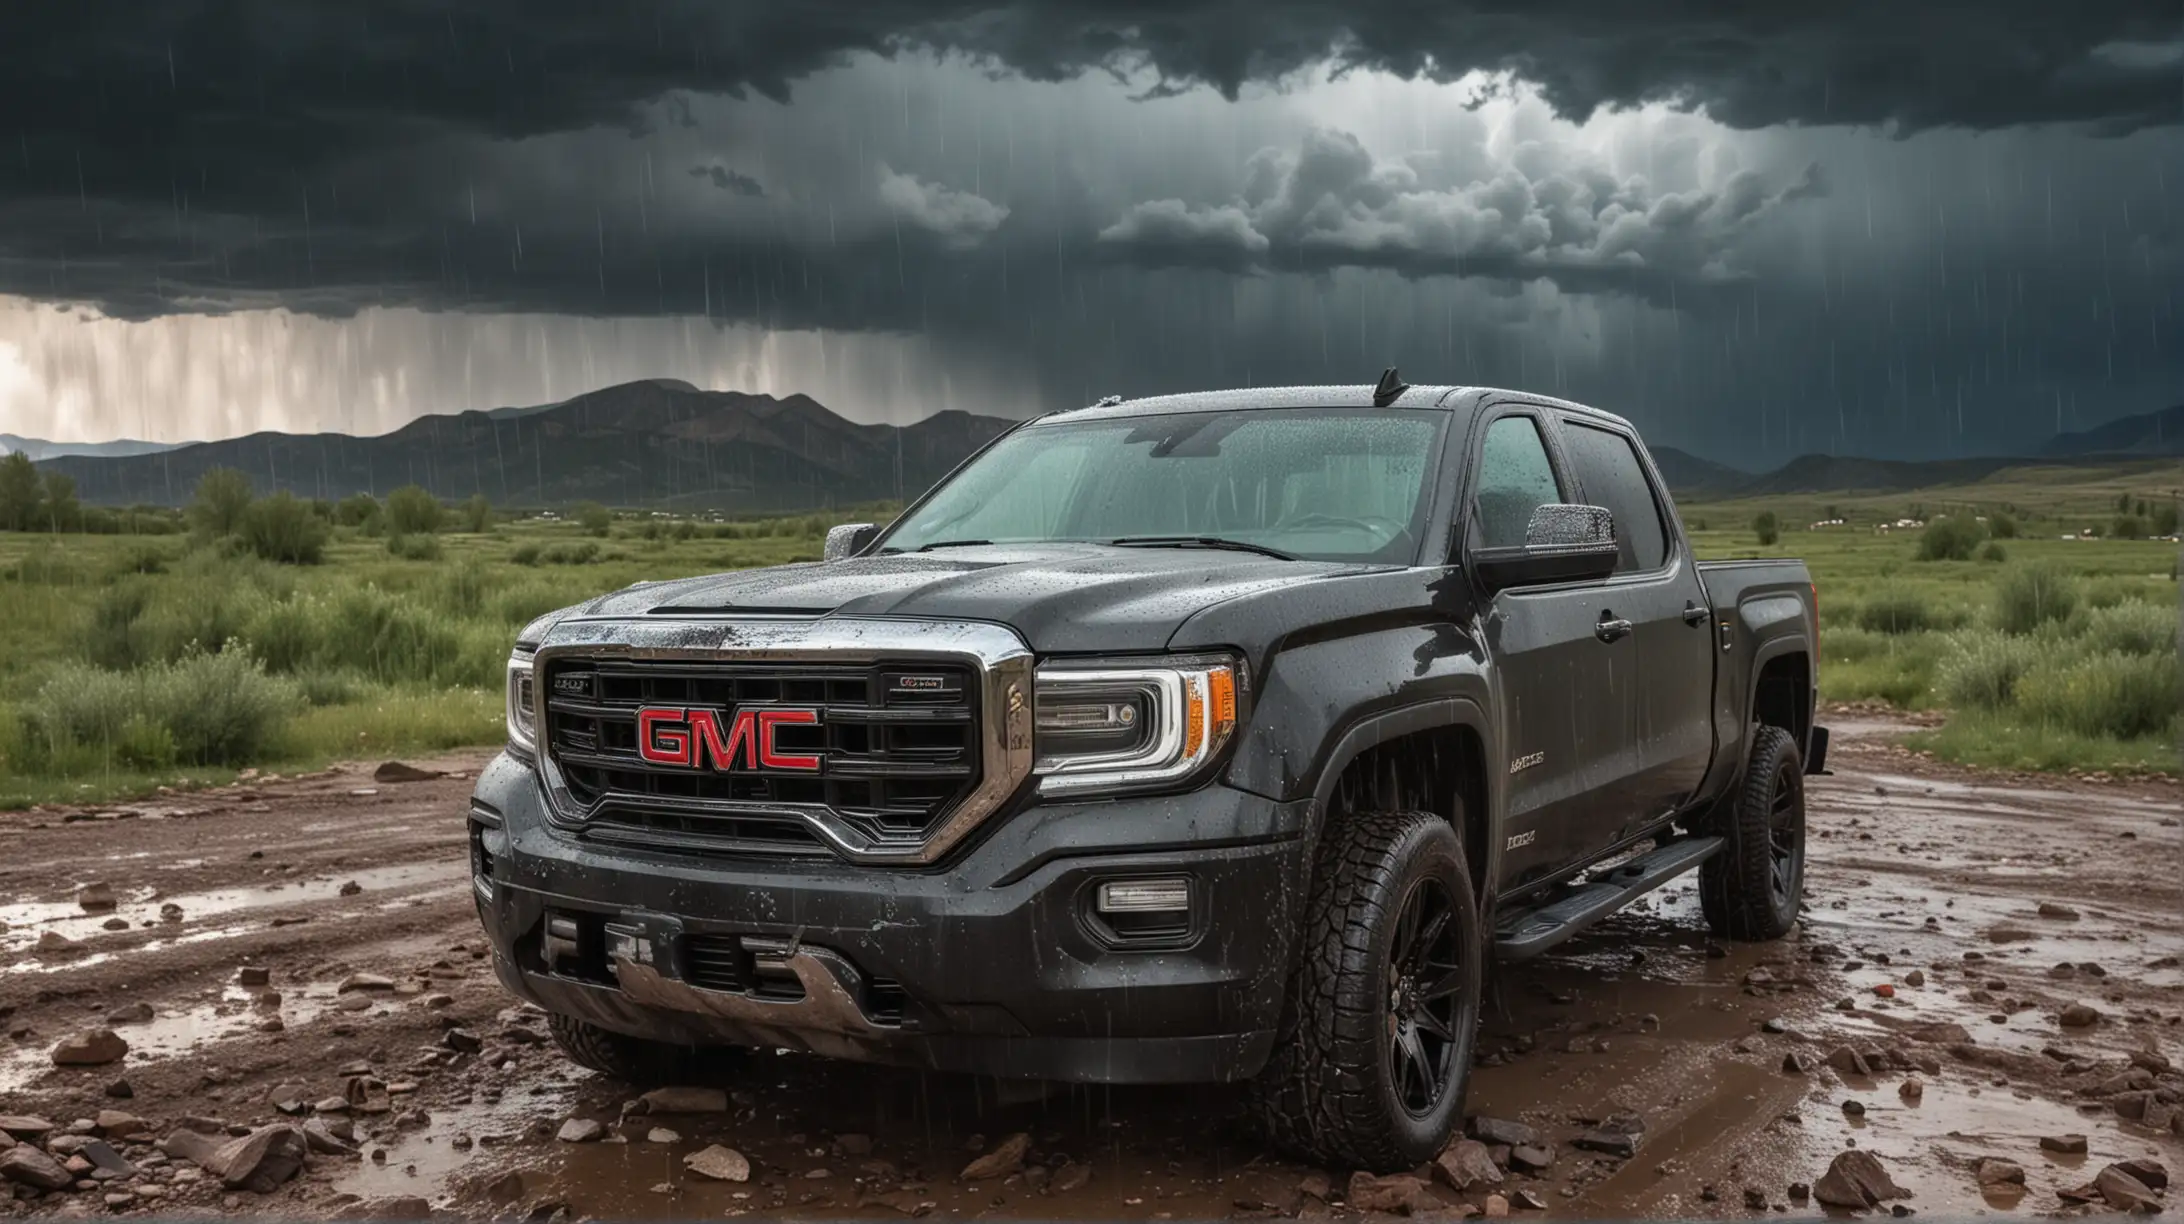 GMC Sierra Truck, car damaged due to hail storm rain, full car in frame shot, colorado mountains background with storming sky